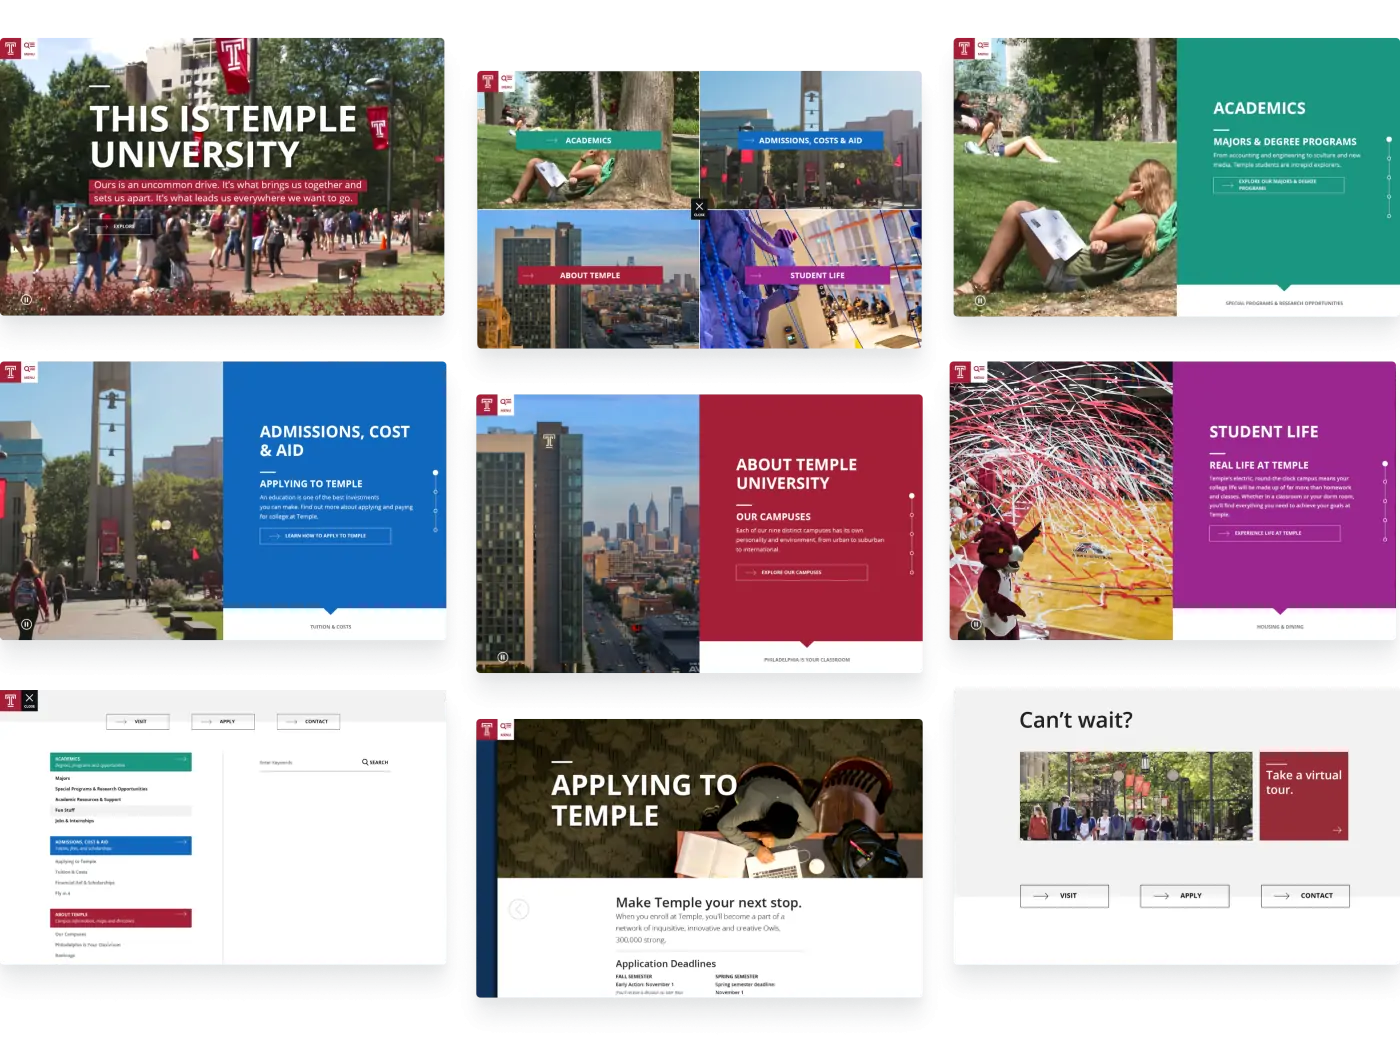 All landing pages of the new digital college viewbook laid out in a collage